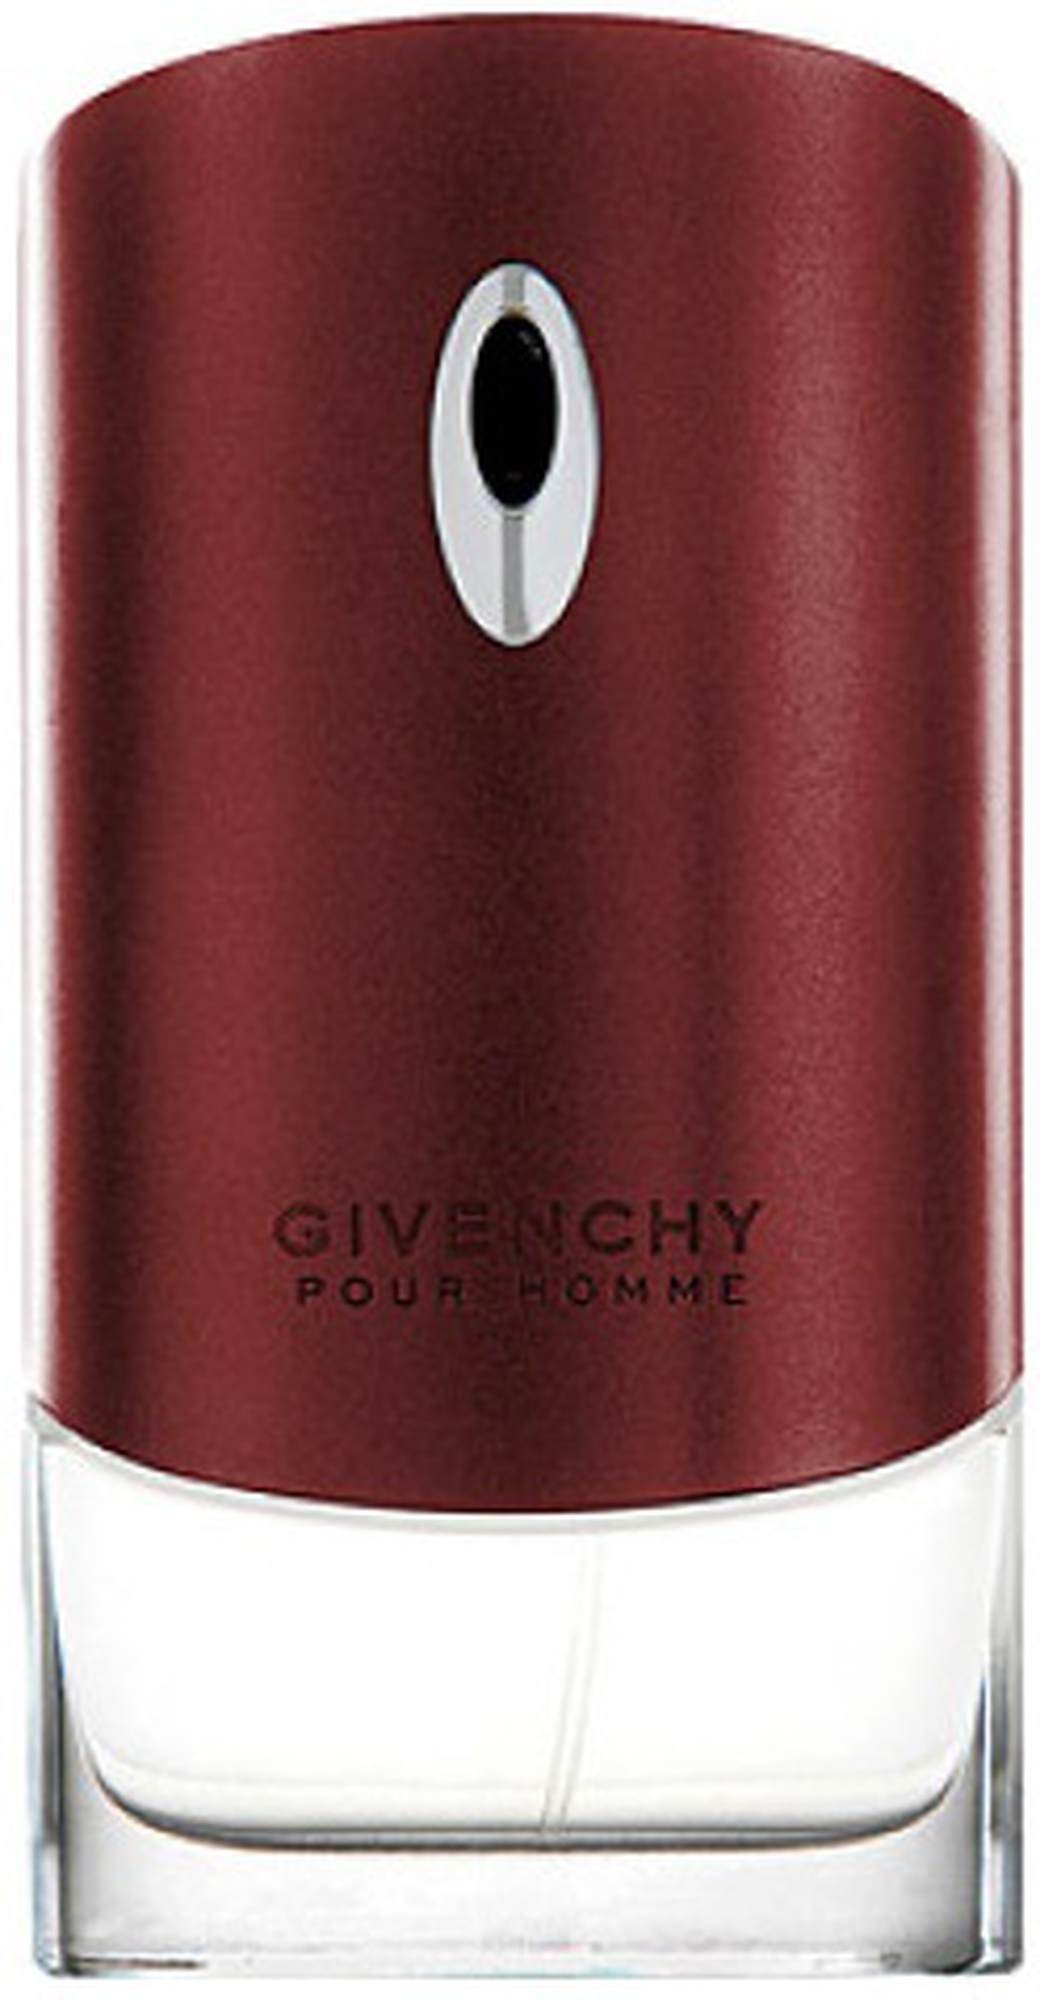 Givenchy pour homme 100. Givenchy pour homme EDT. Givenchy Givenchy pour homme, 100 ml. Givenchy pour homme men 100ml. Givenchy pour homme 100ml мужские.